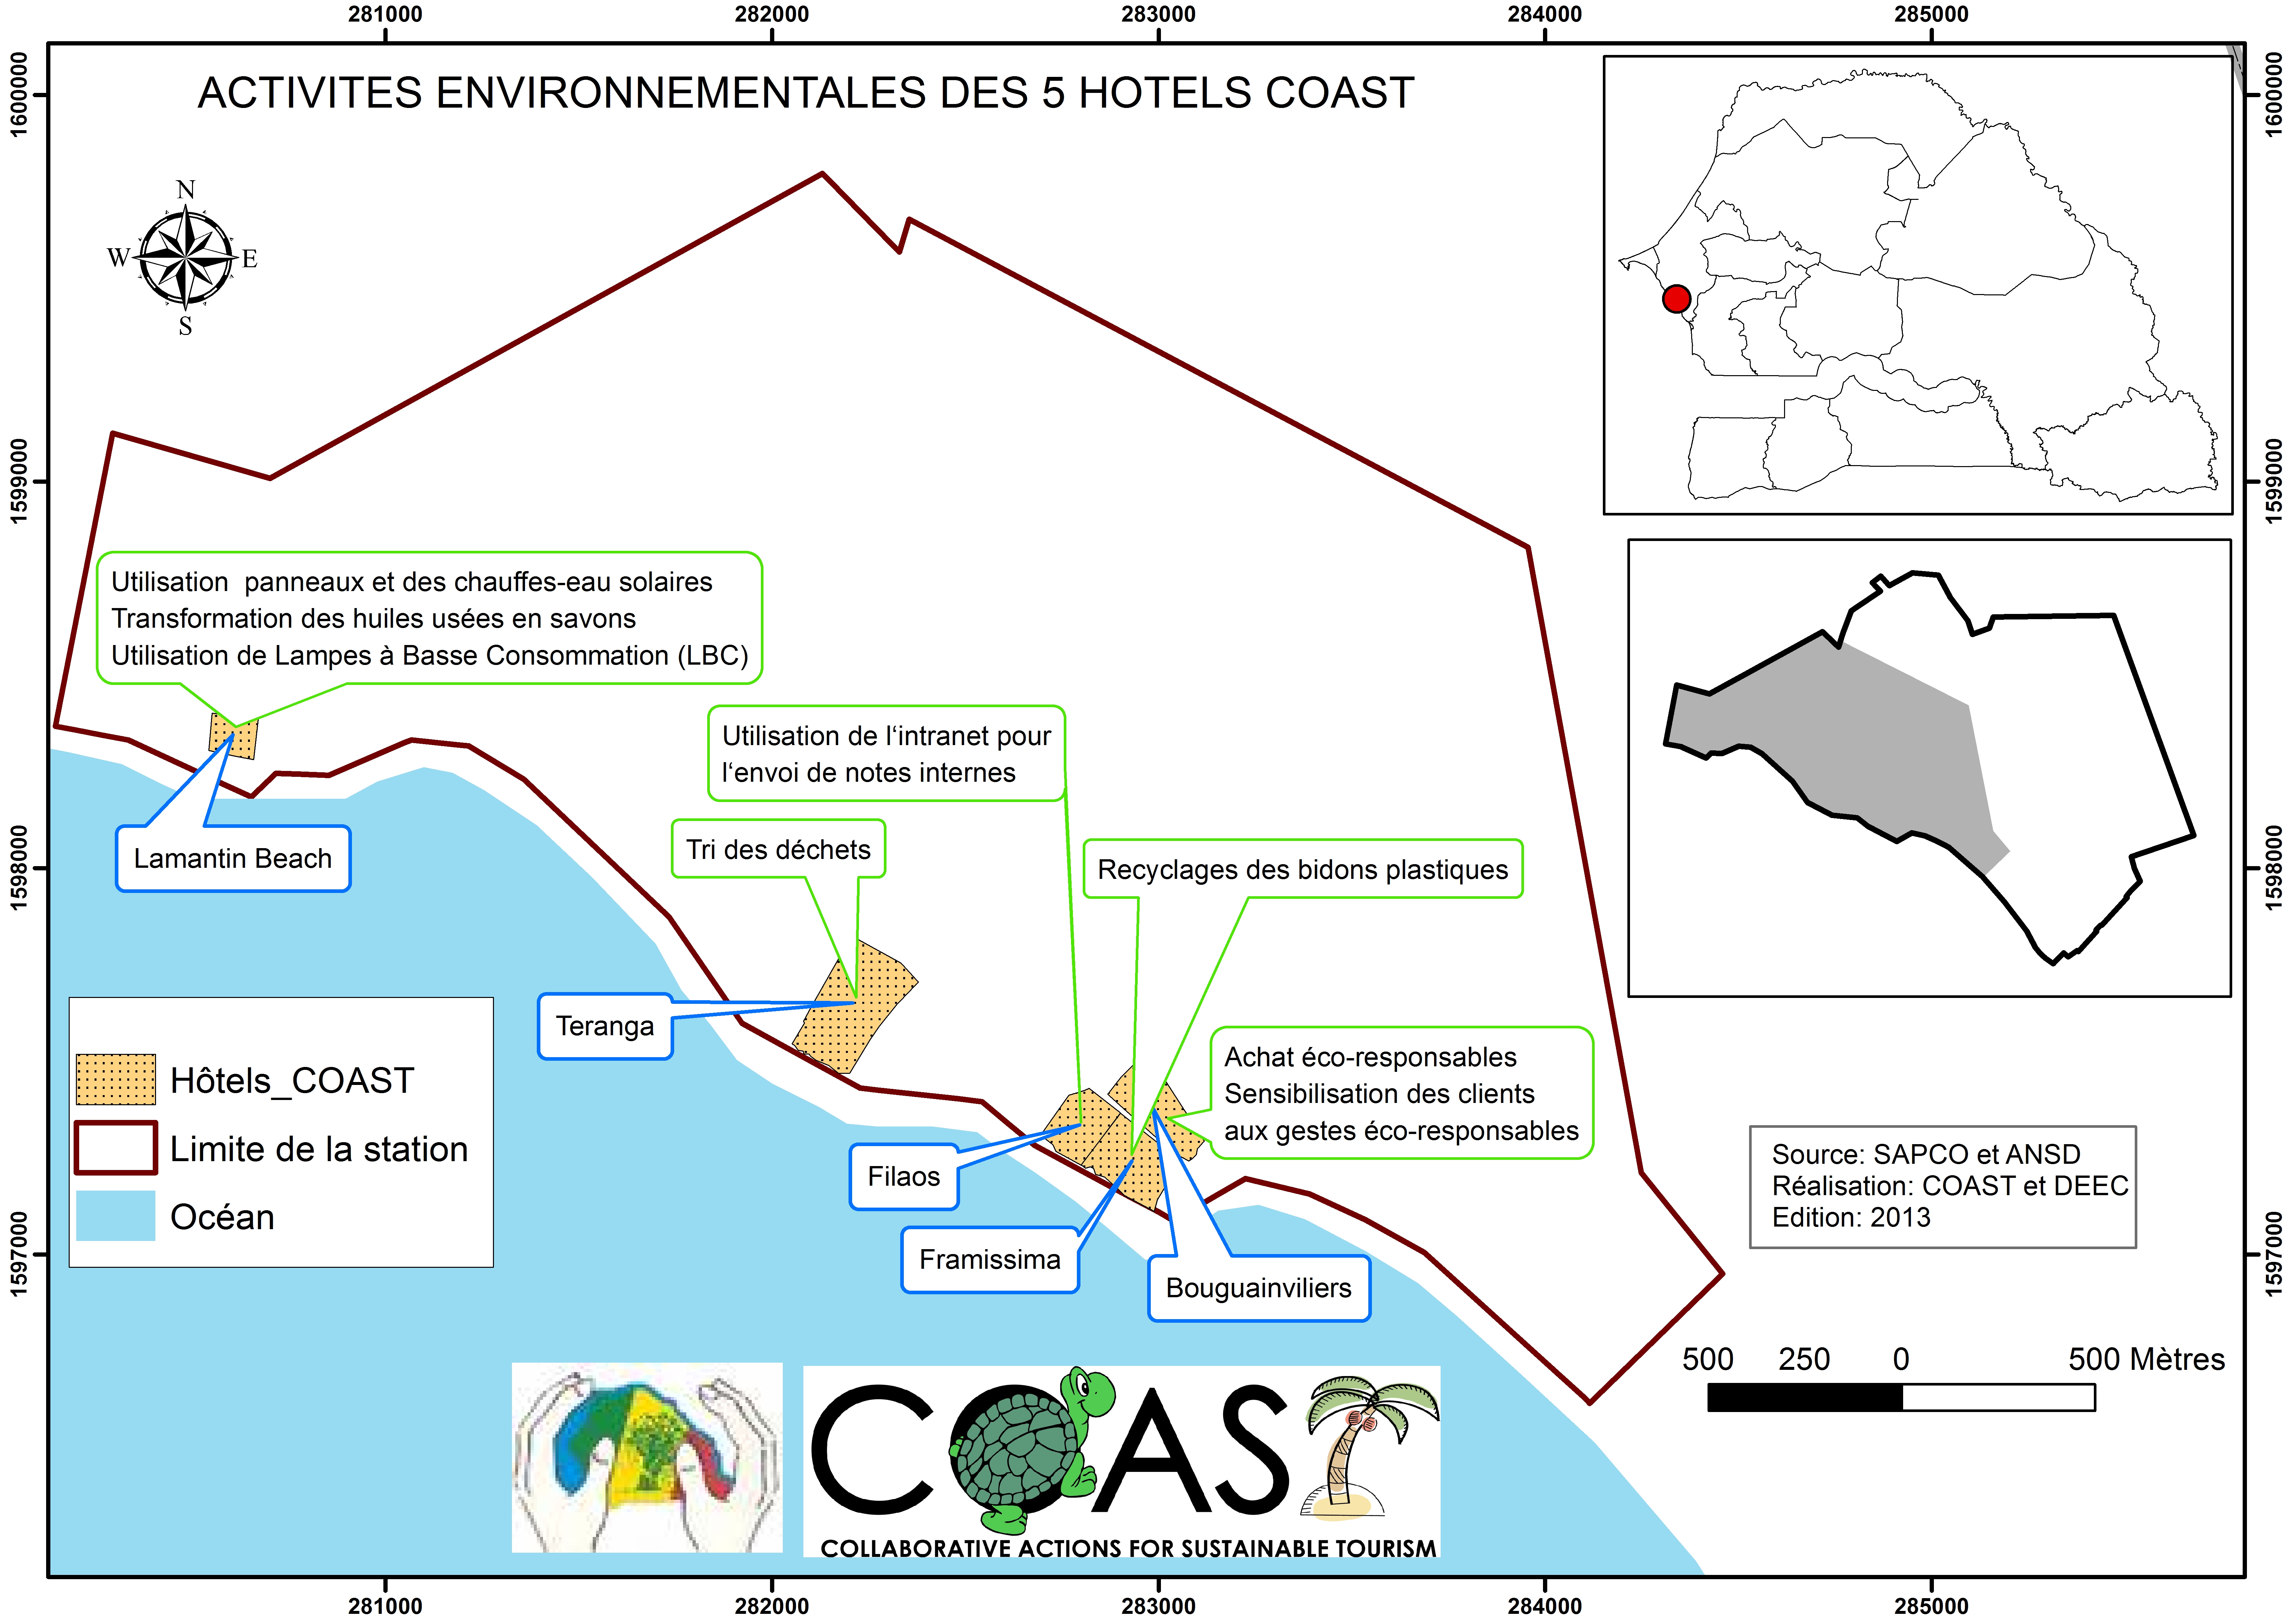 2013.10.28 Saly Mapping ACTIVITES ENVIRONNEMENTALES.jpg